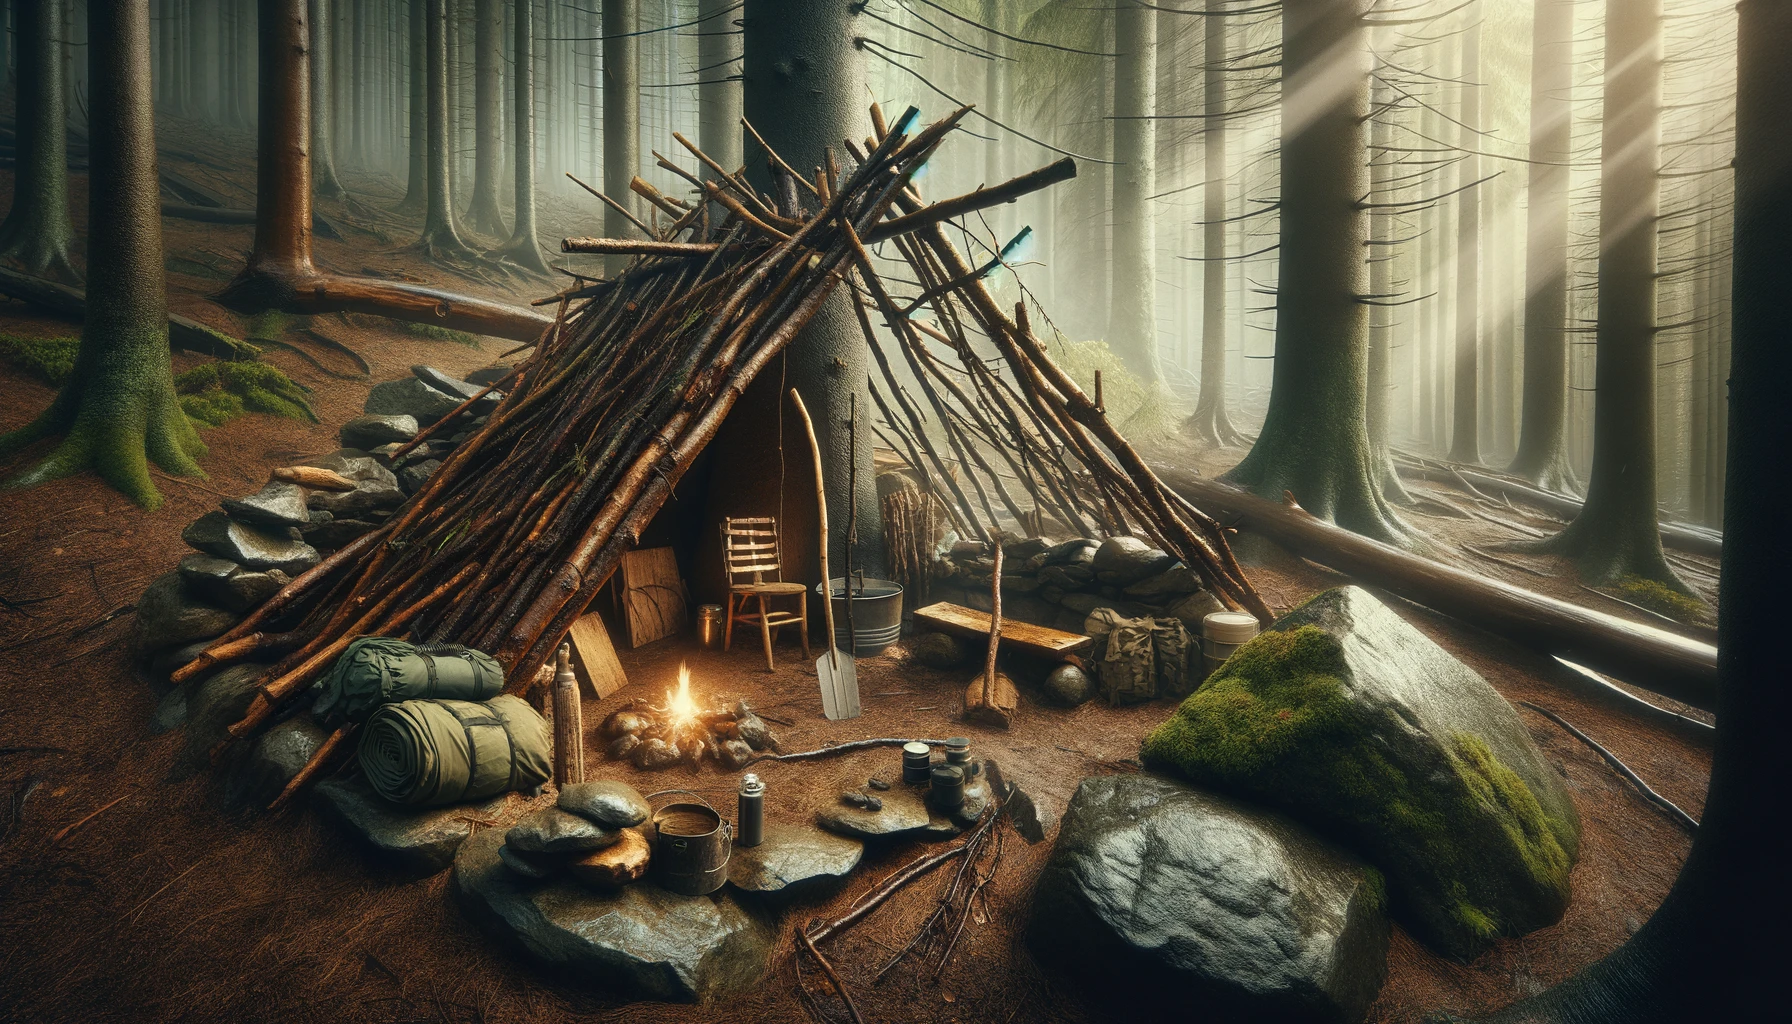 A highly detailed and realistic depiction of constructing a lean-to shelter against a tree or rock, utilizing branches, leaves, and natural resources, with strategic orientation for protection from wind and rain, and proximity to a heat source for warmth. The scene demonstrates the shelter's utility in survival situations, providing an educational and inspiring guide on building quick and effective protection in the wild, appealing to preppers' emphasis on survival skills and preparedness.